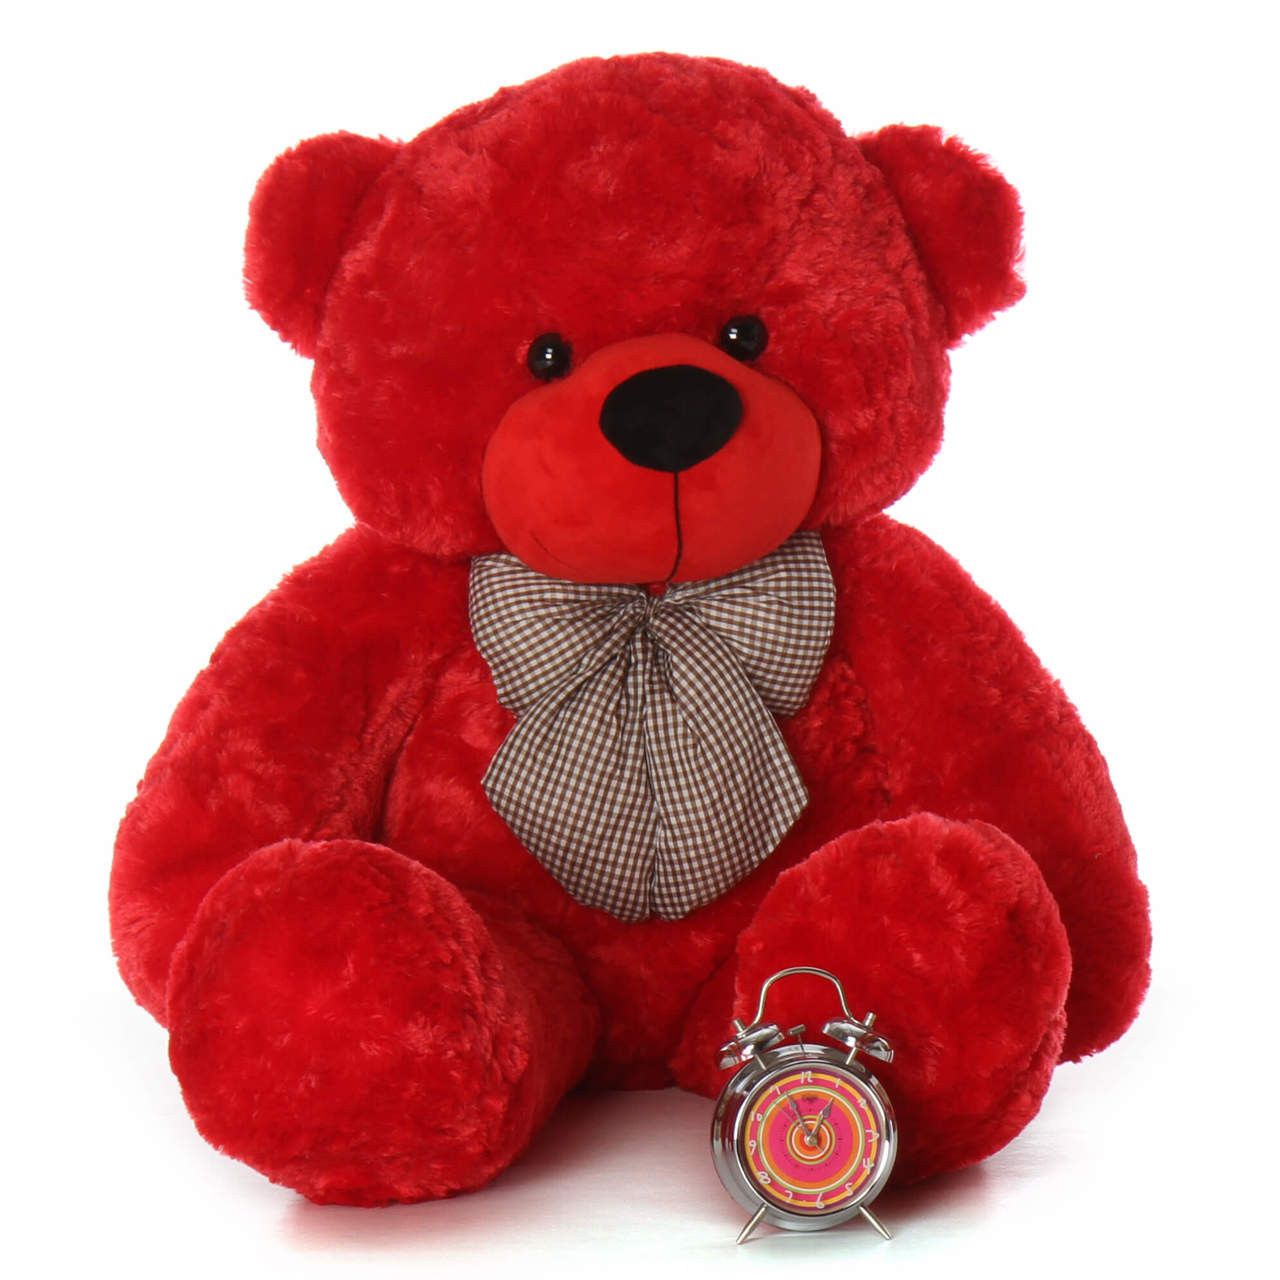 4ft Red Life Size Teddy Bear Bitsy Cuddles from Giant Teddy brand